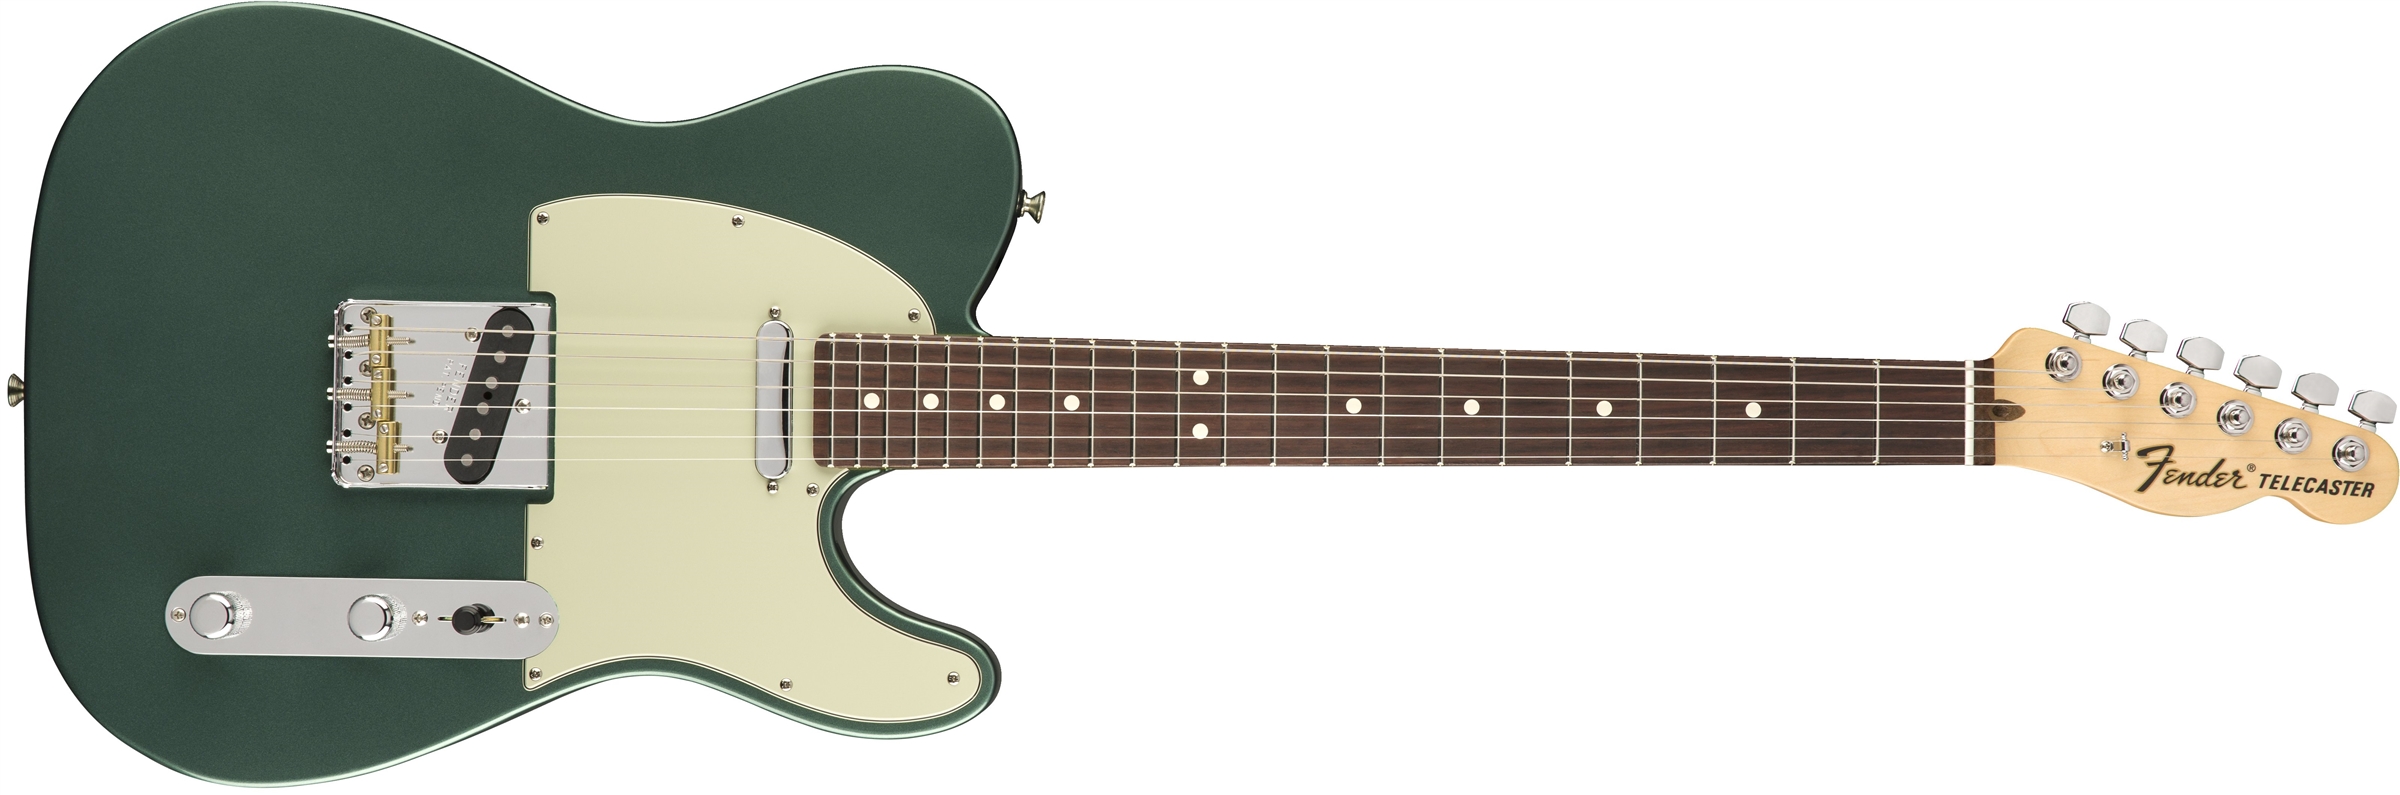 Fender American Special Limited Edition Telecaster Sherwood Green